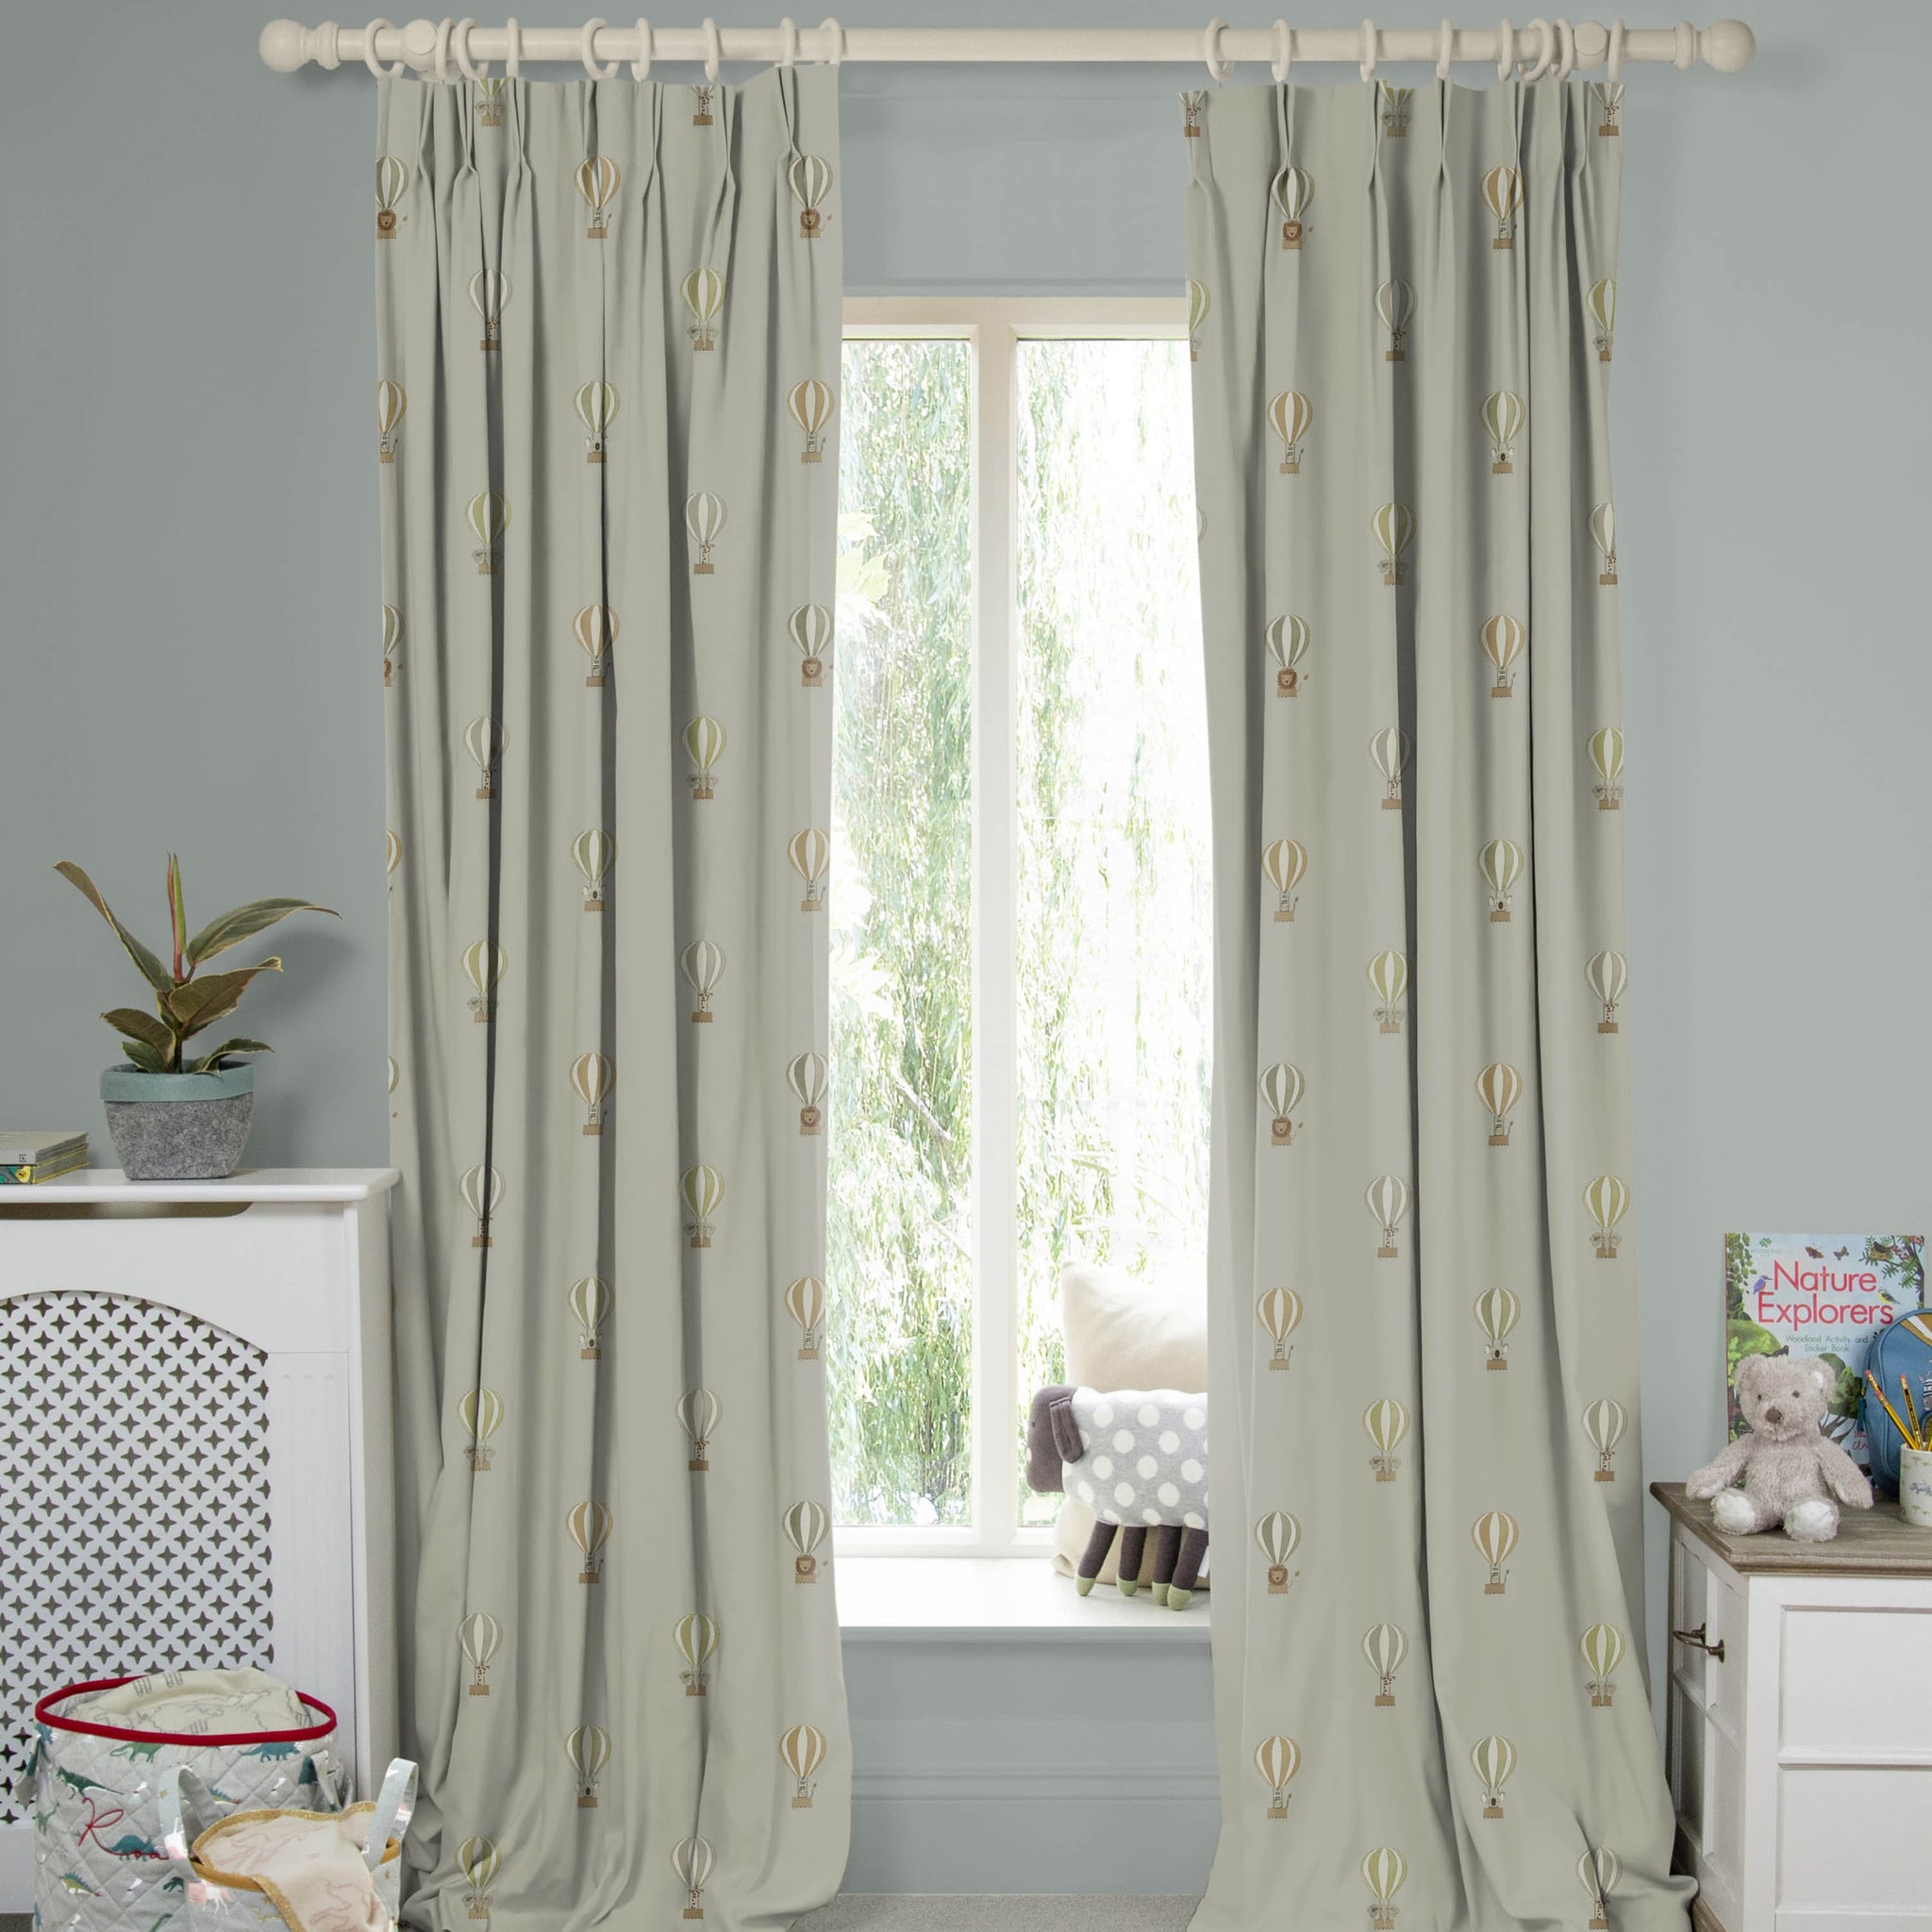 Bears & Balloons Mint Grey Made to Measure Curtains